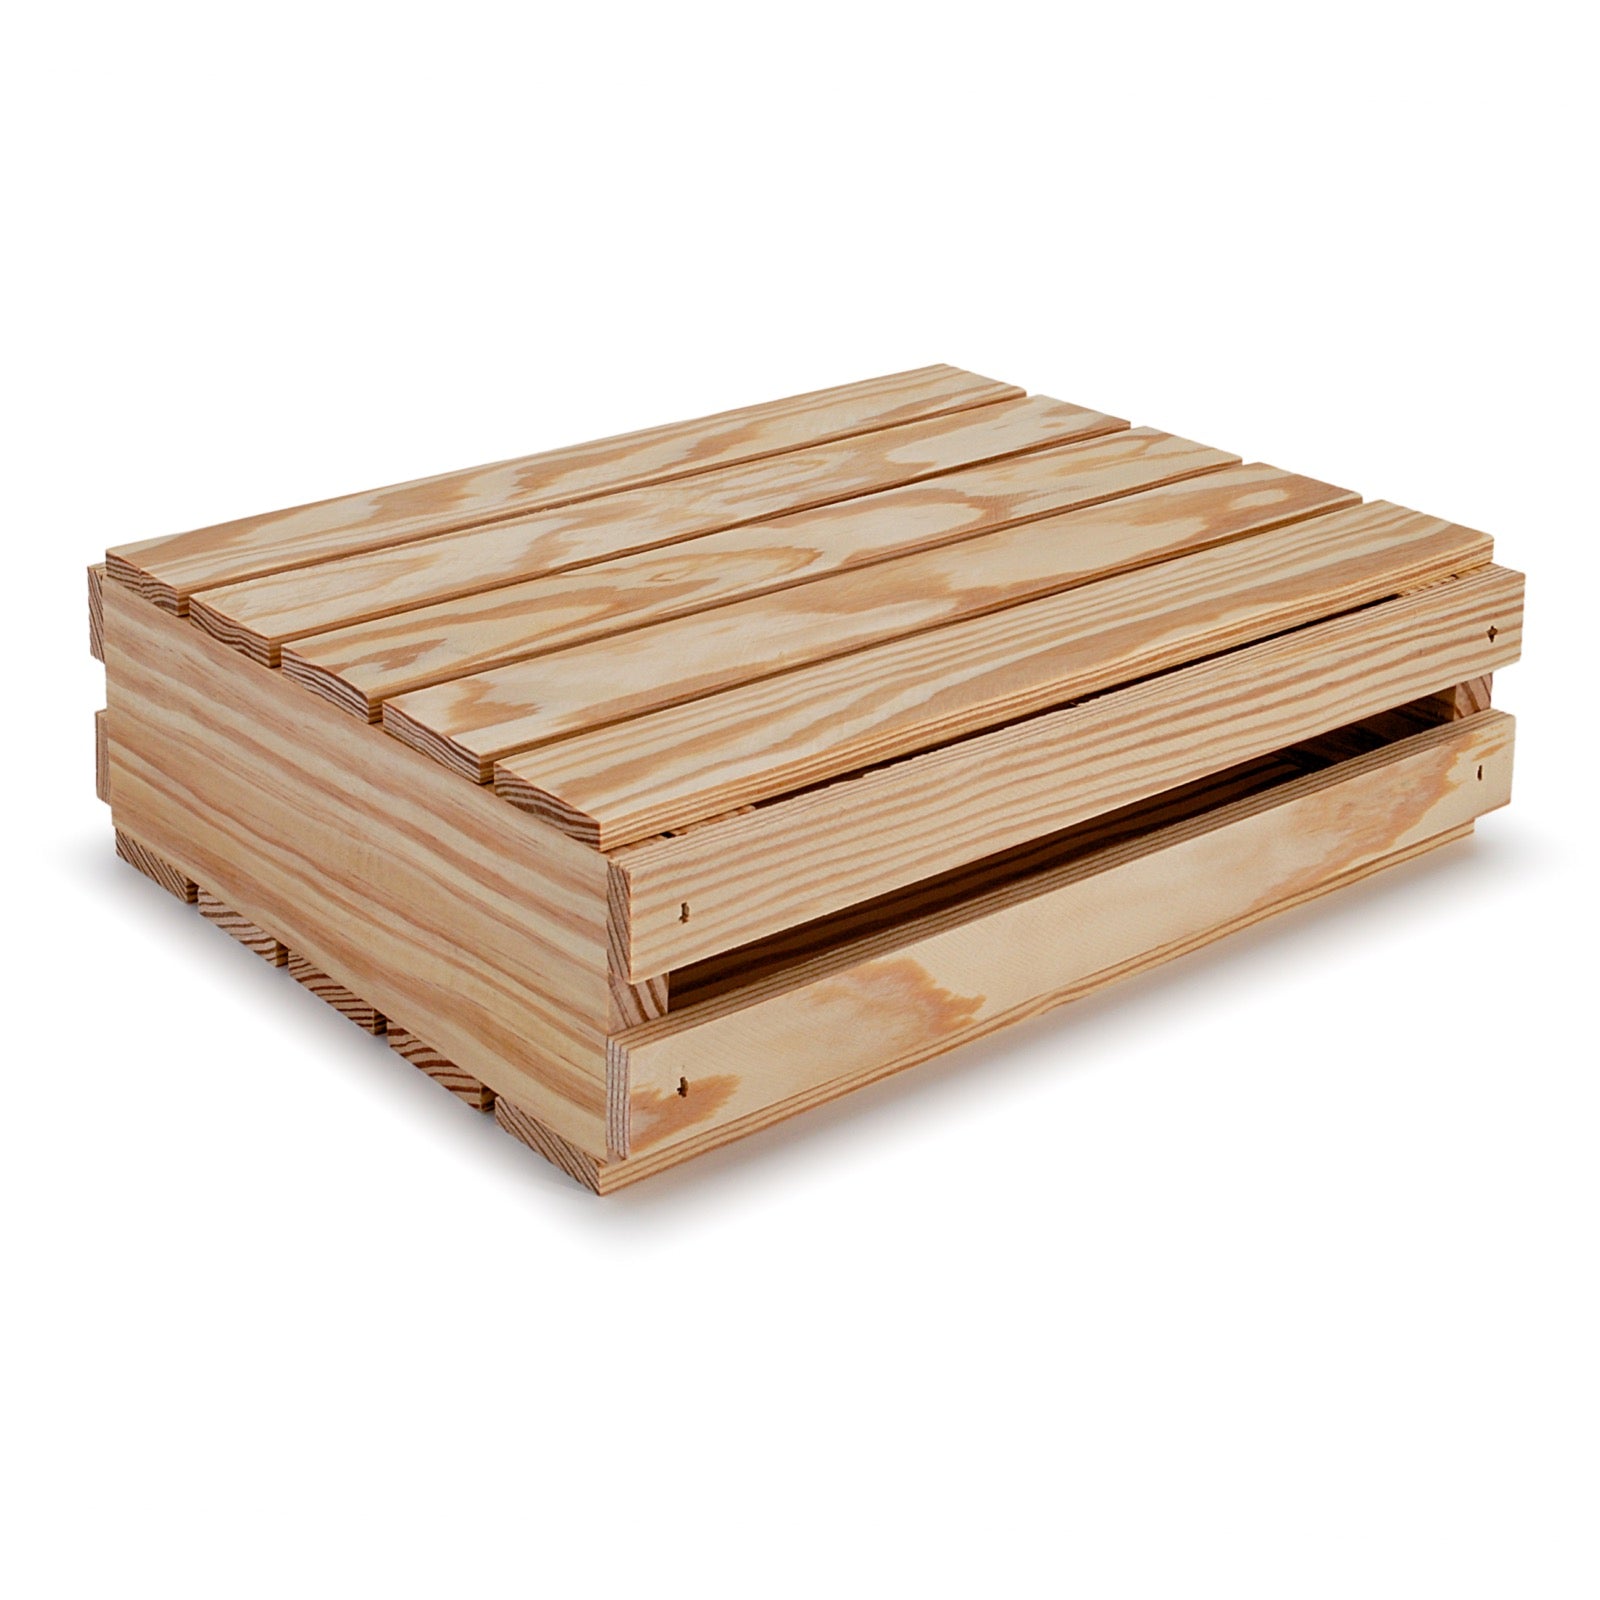 Small wooden crates with lid 12x10x3.5, 6-SS-12-10-3.5-NX-NW-LL, 12-SS-12-10-3.5-NX-NW-LL, 24-SS-12-10-3.5-NX-NW-LL, 48-SS-12-10-3.5-NX-NW-LL, 96-SS-12-10-3.5-NX-NW-LL